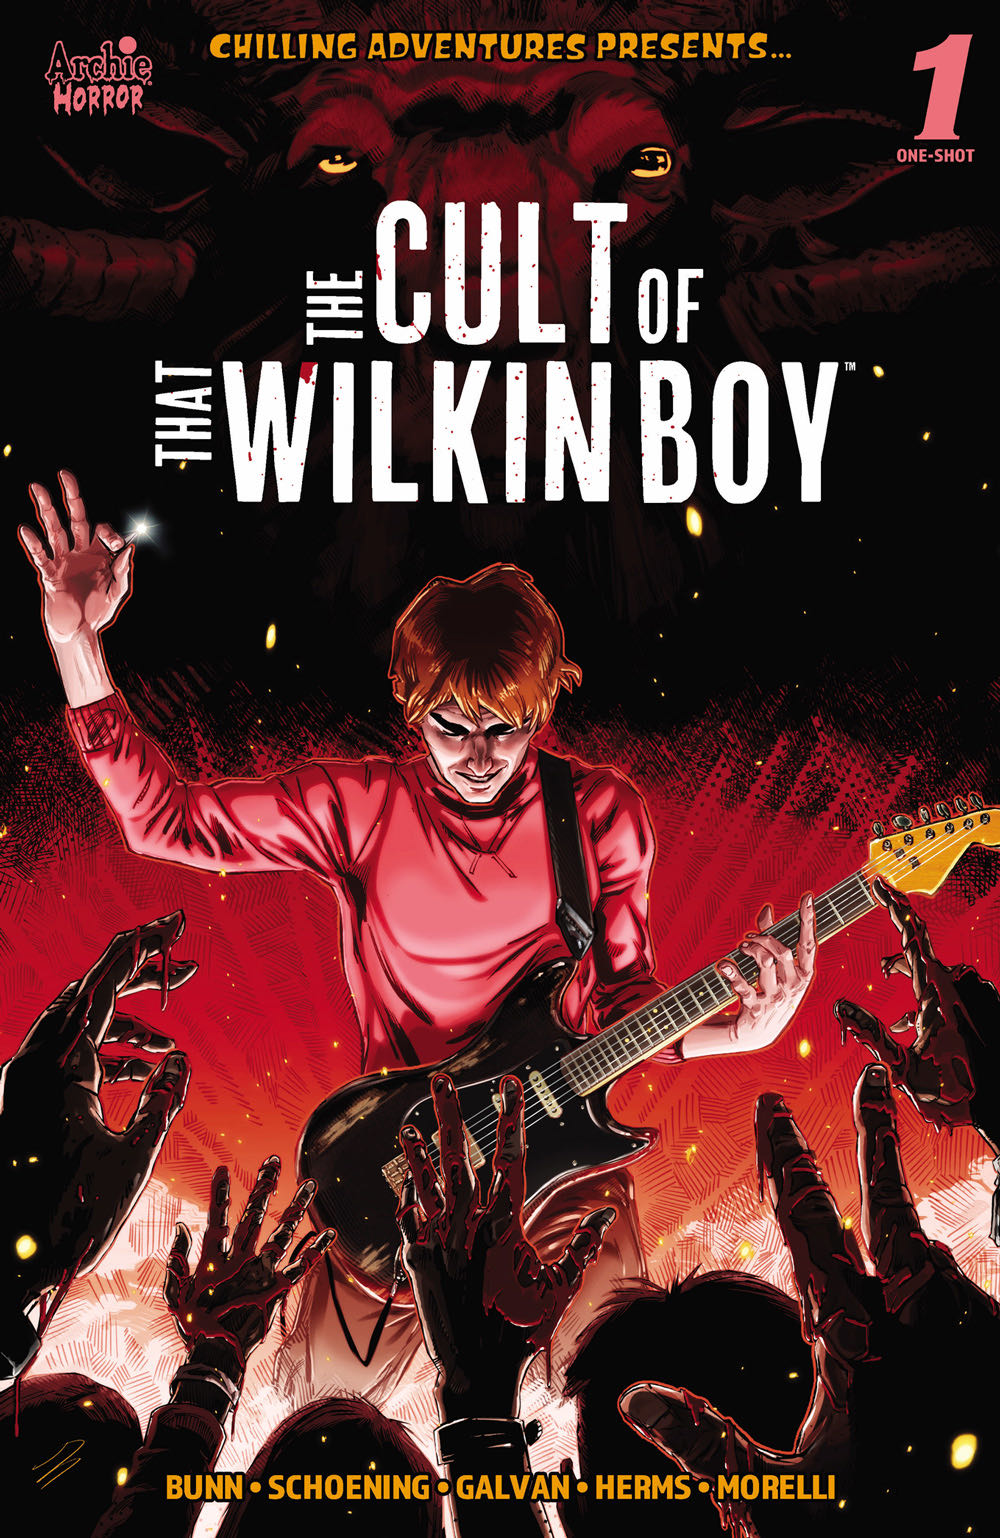 Chilling Adventures Presents The Cult Of That Wilkin Boy - Archie Horror (1) comic book collectible [Barcode 76281689223000111] - Main Image 1